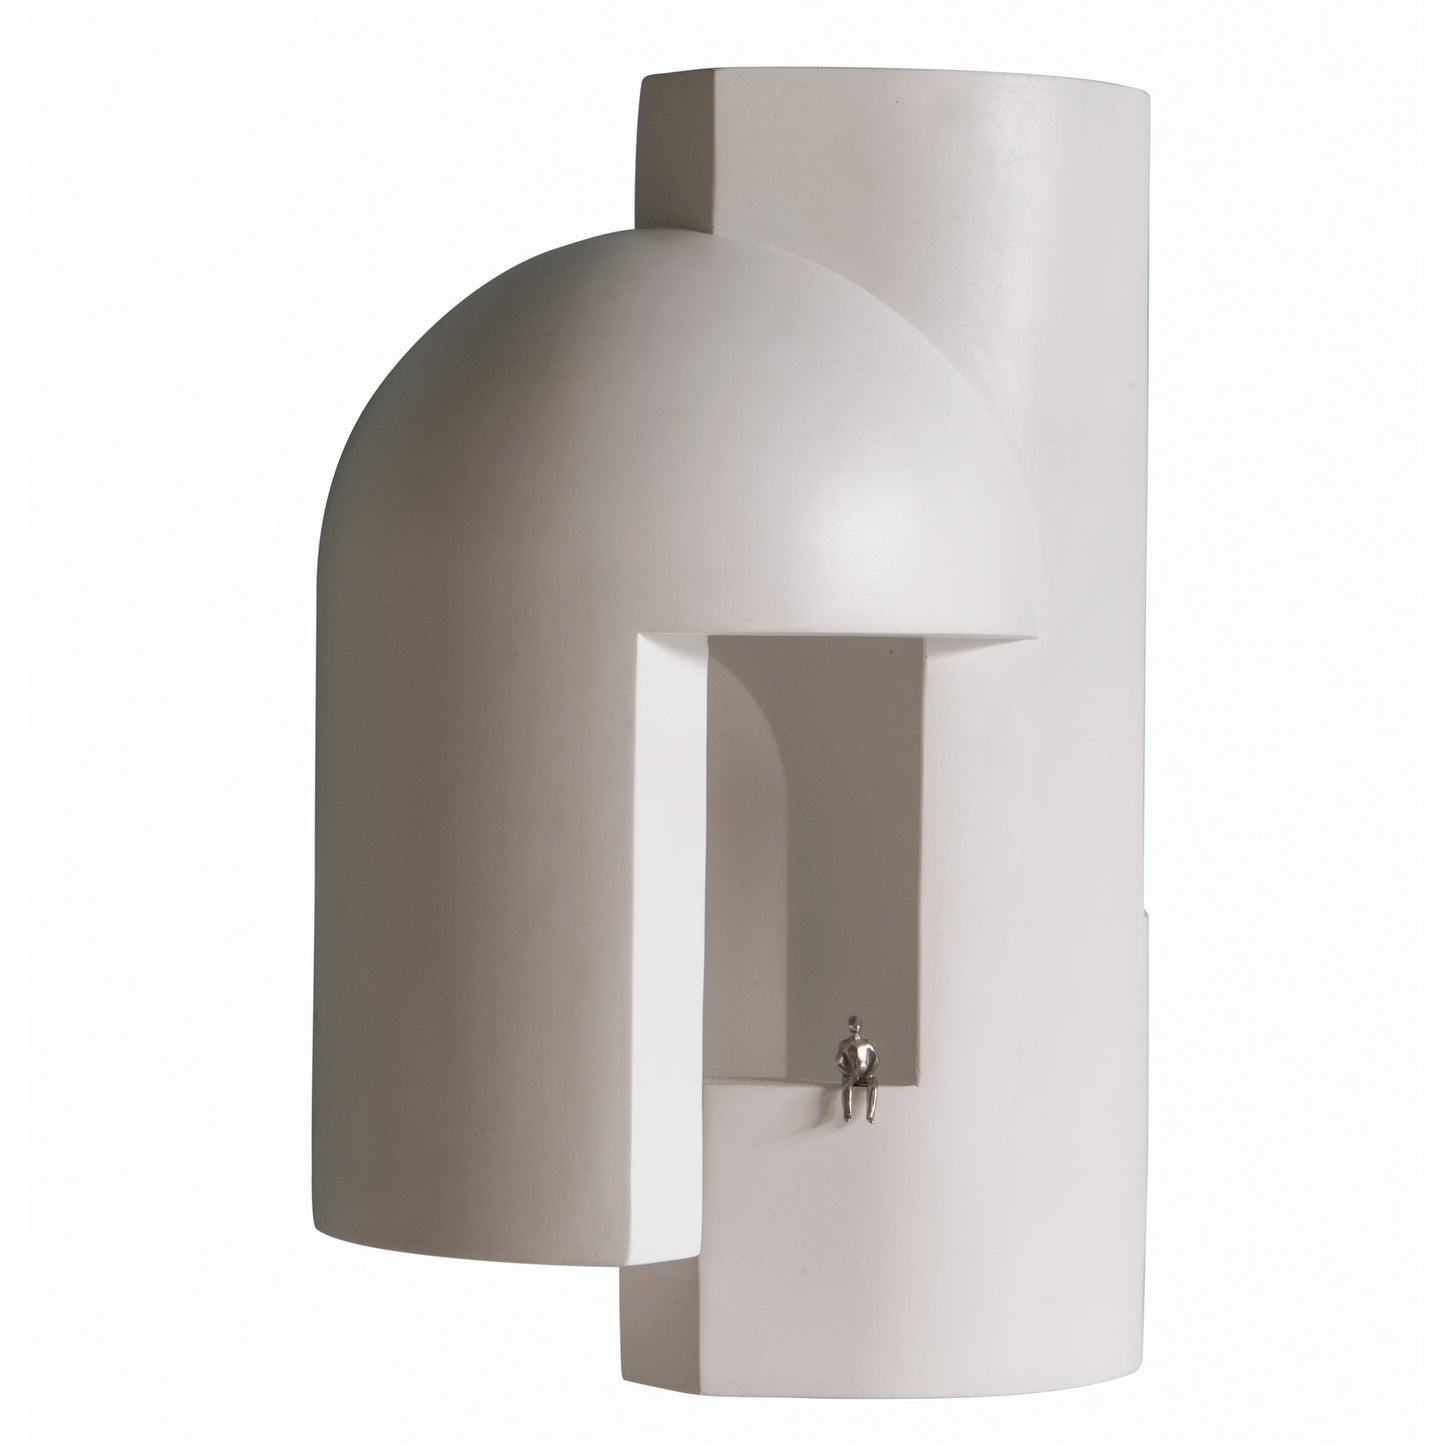 SOUL Wall Sconce - $506.00